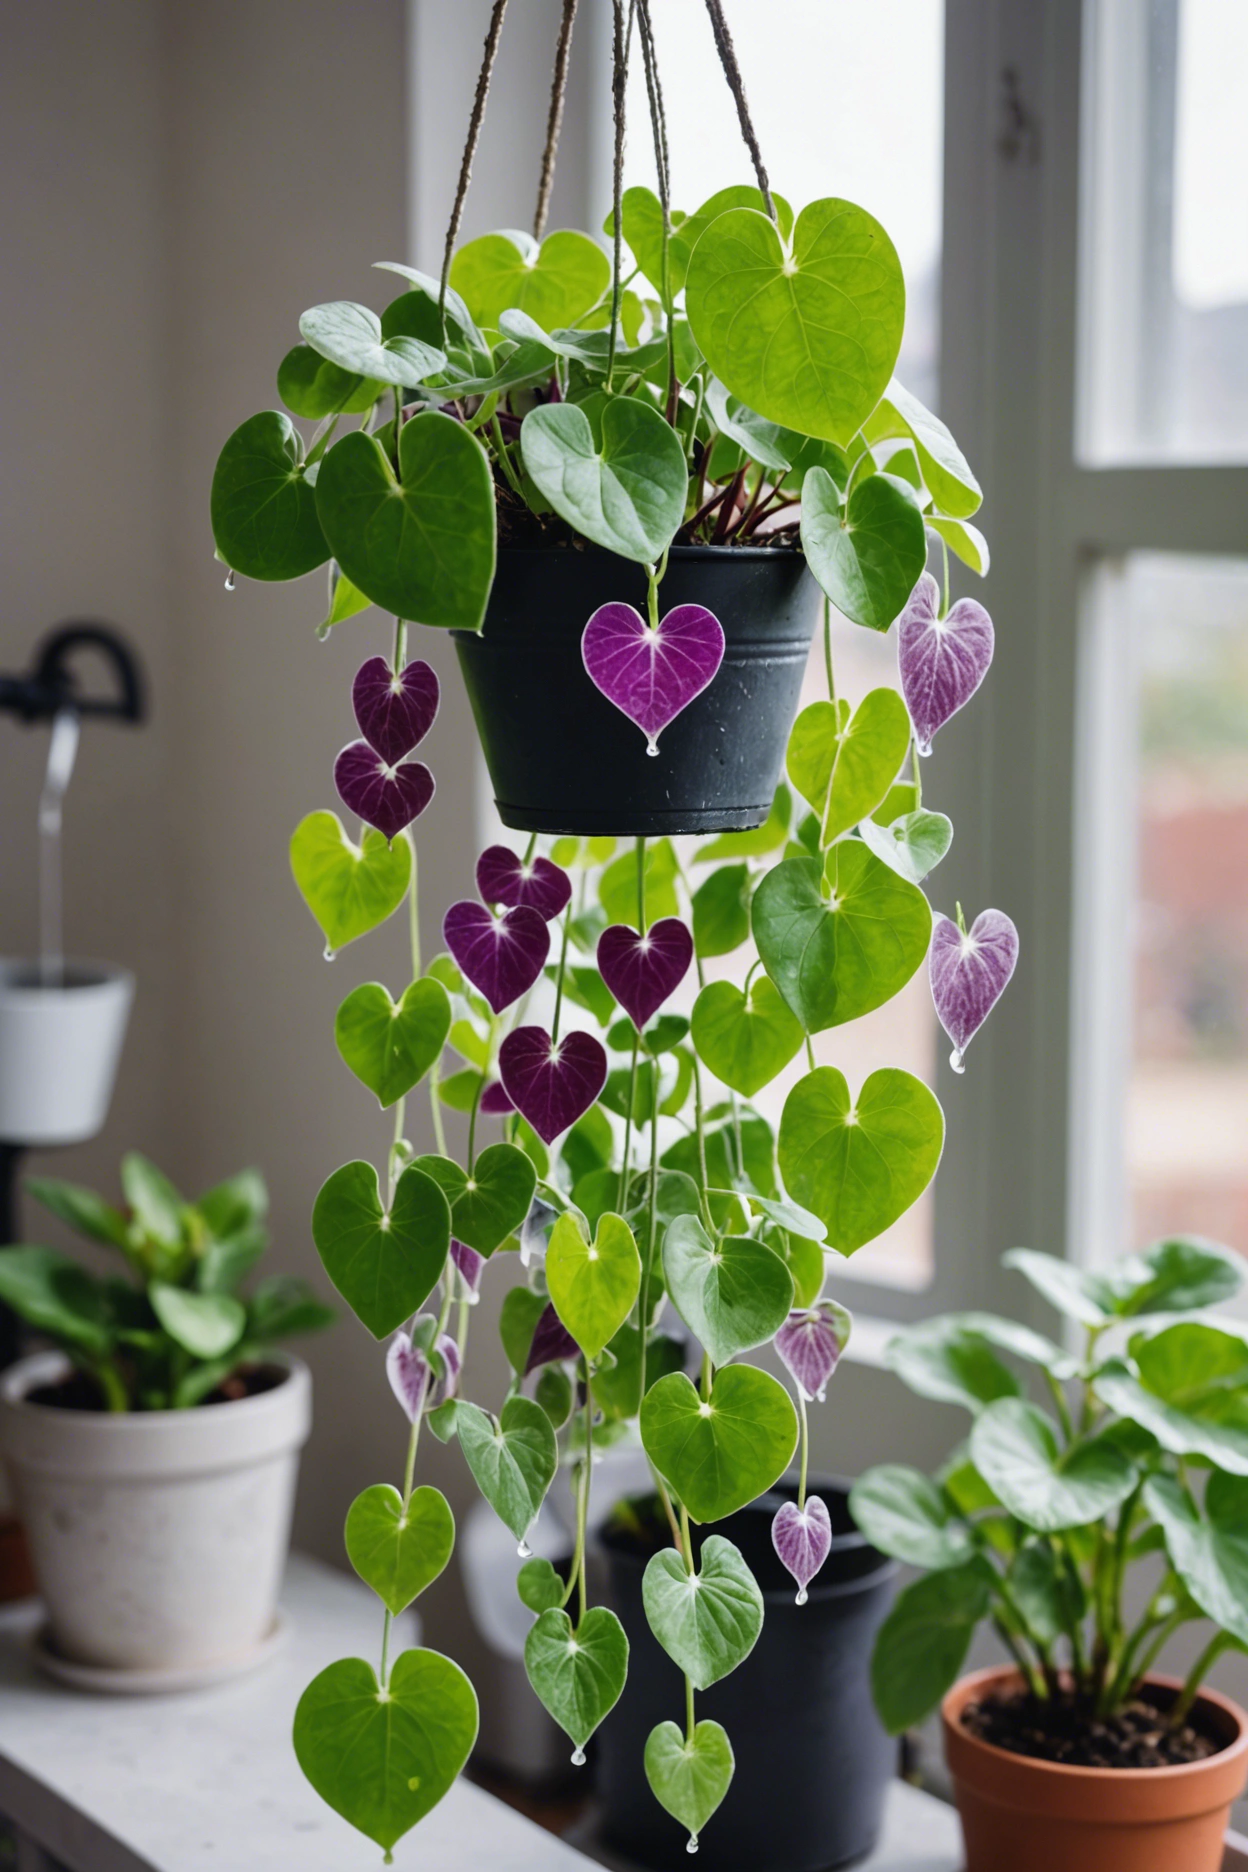 "Close-up of a healthy String of Hearts plant with heart-shaped green and purple leaves in a hanging pot, with a watering can in the background."